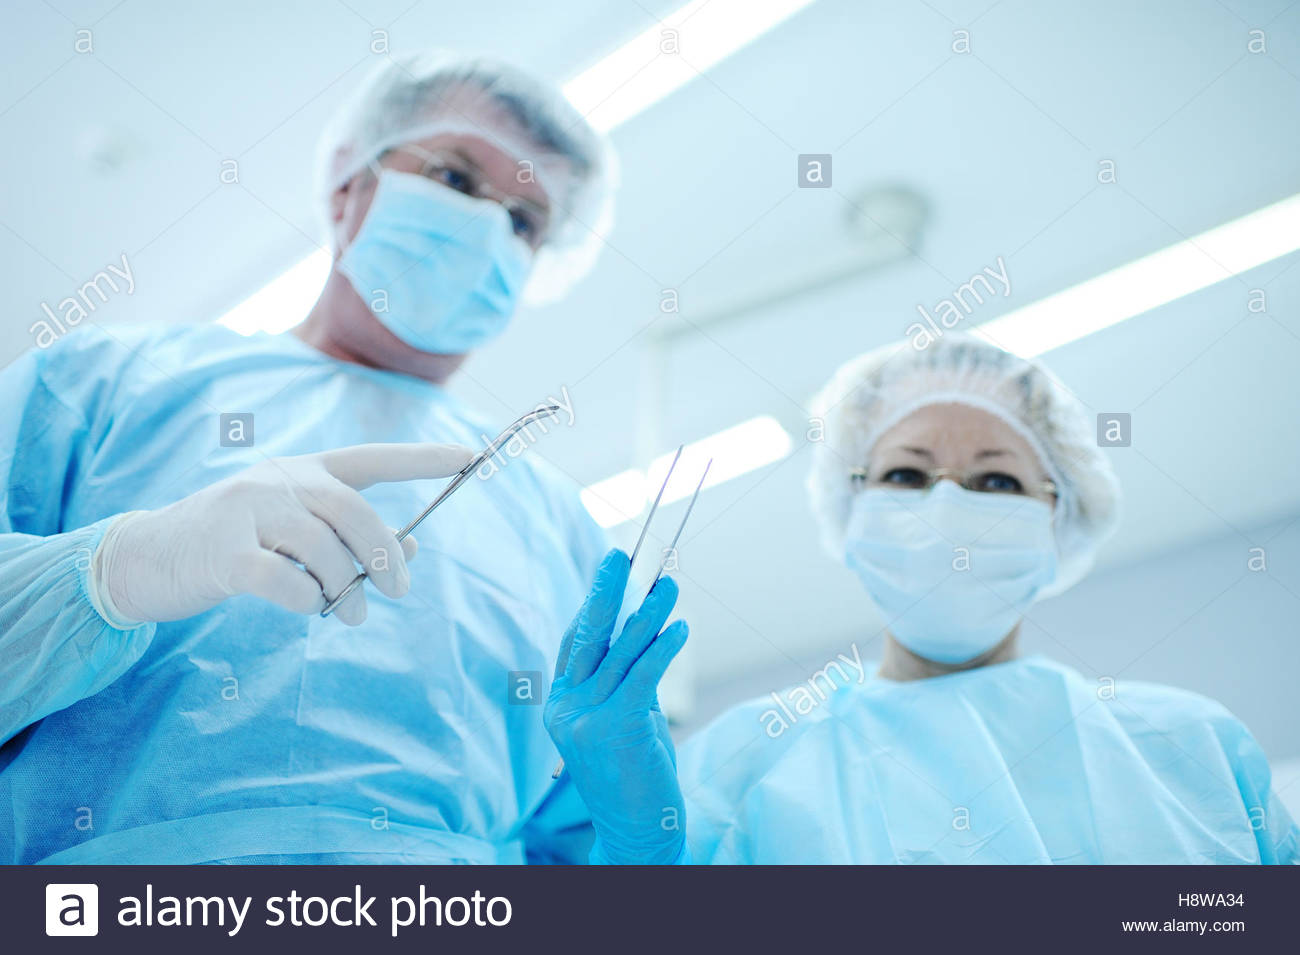 Surgeons Operate On A Patient In The Background Surgical Lamp